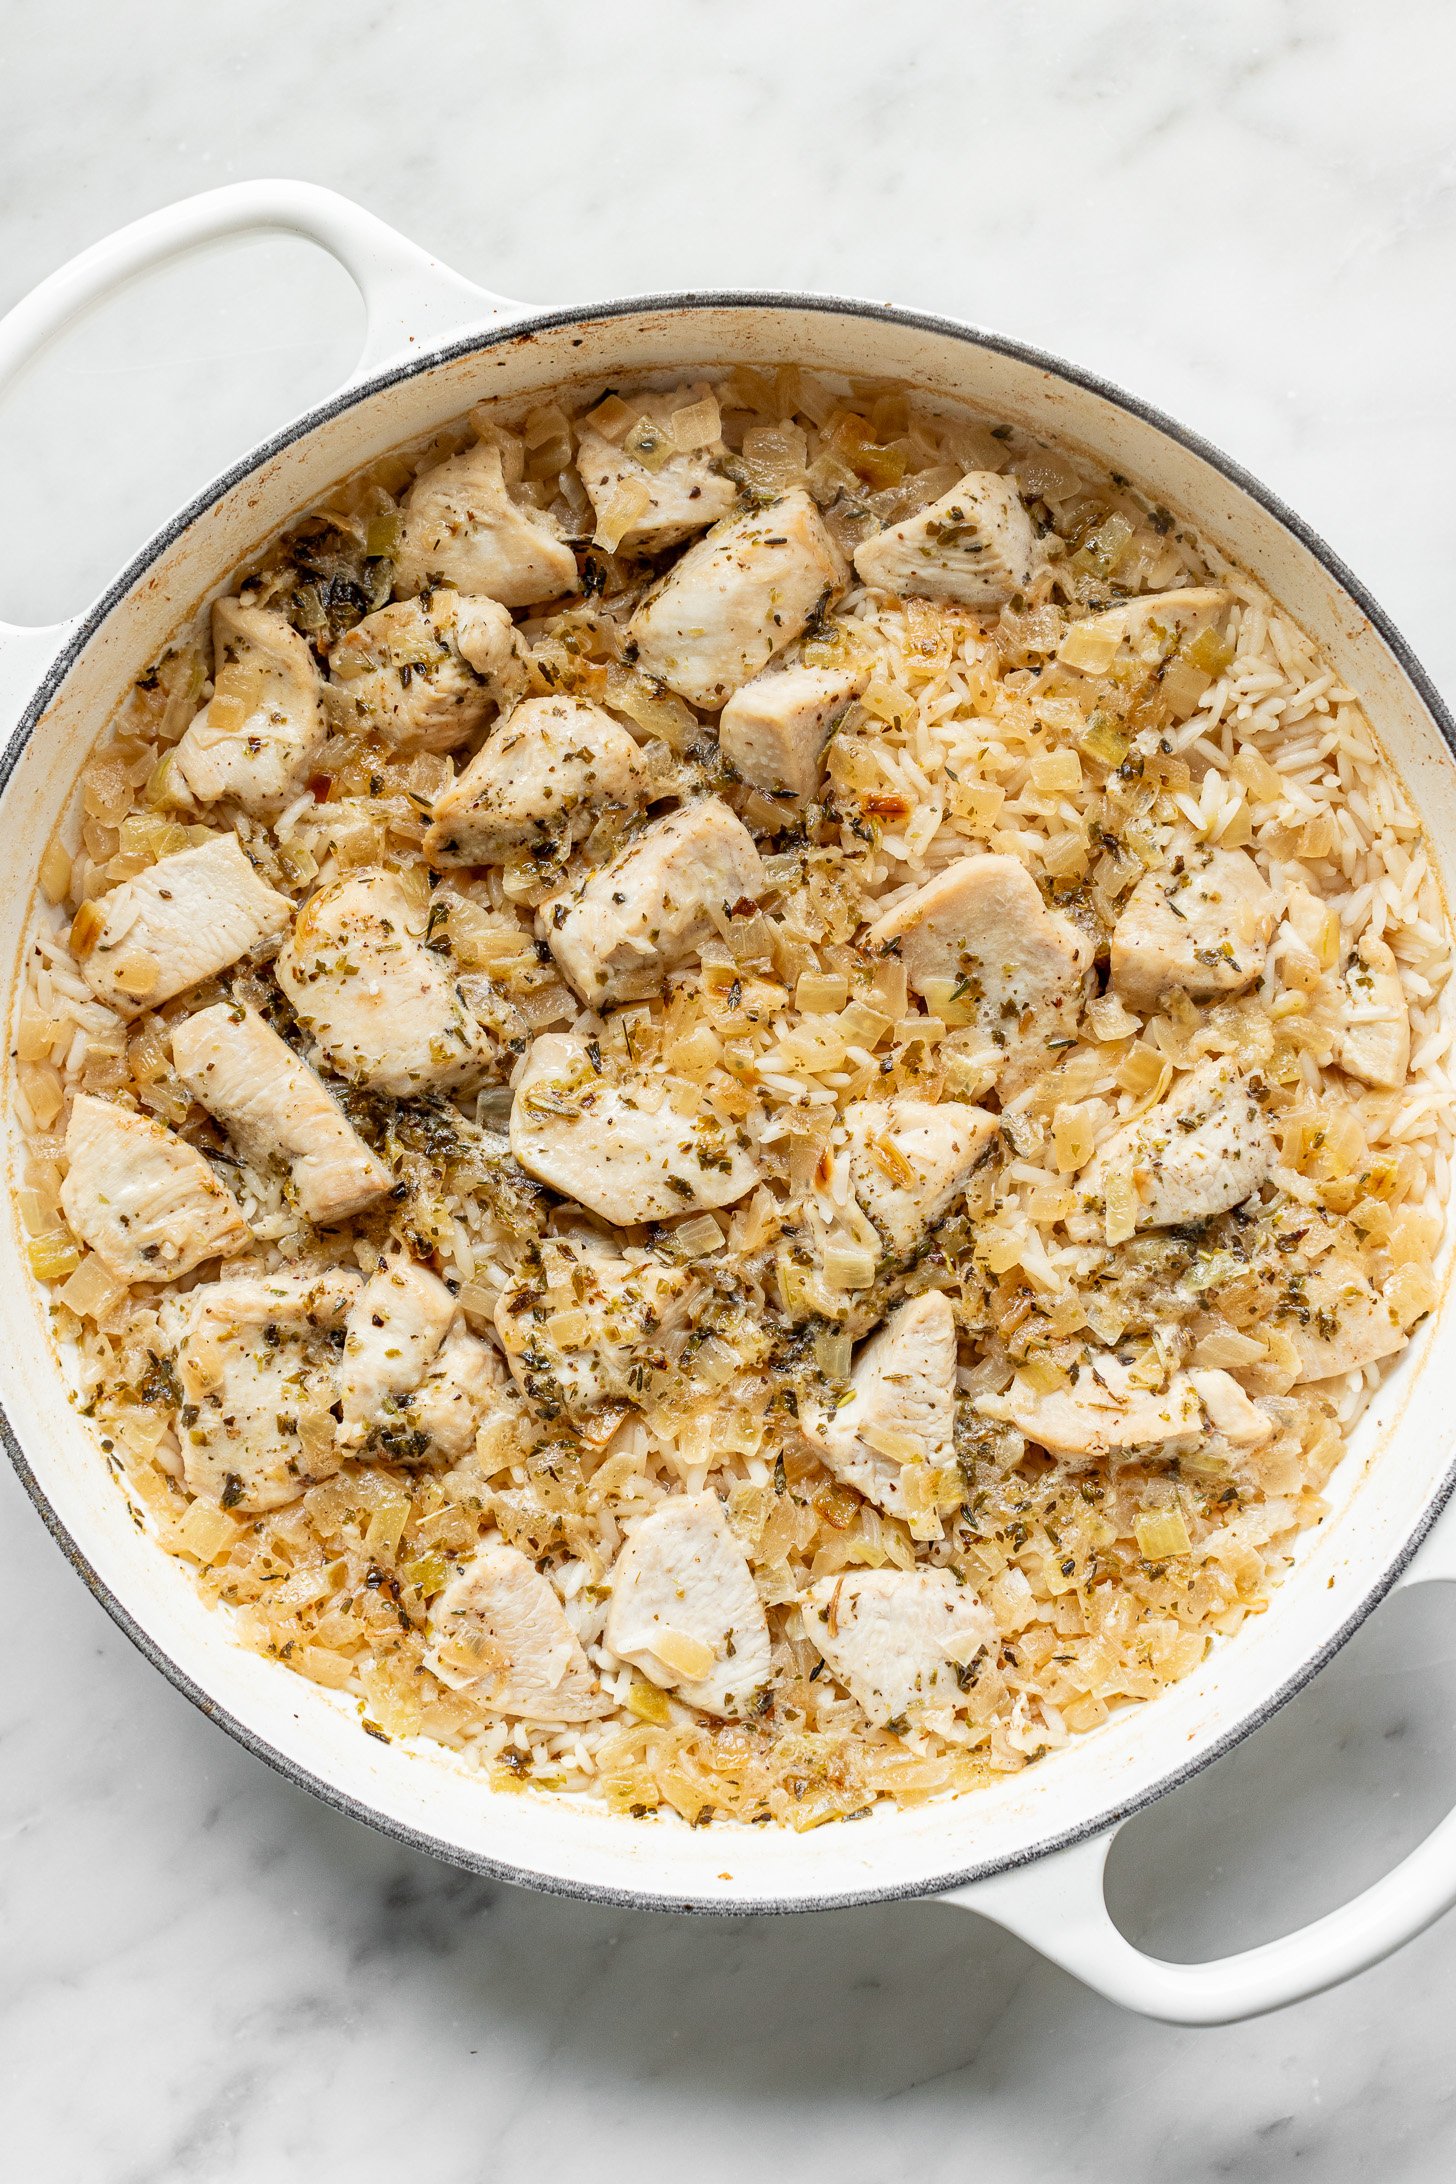 Chicken broth, rice, cooked chicken breast chunks, sauteed onions, and seasonings all mixed together and cooked so liquid has been absorbed in a white dutch oven. Dutch oven is sitting on a white countertop.